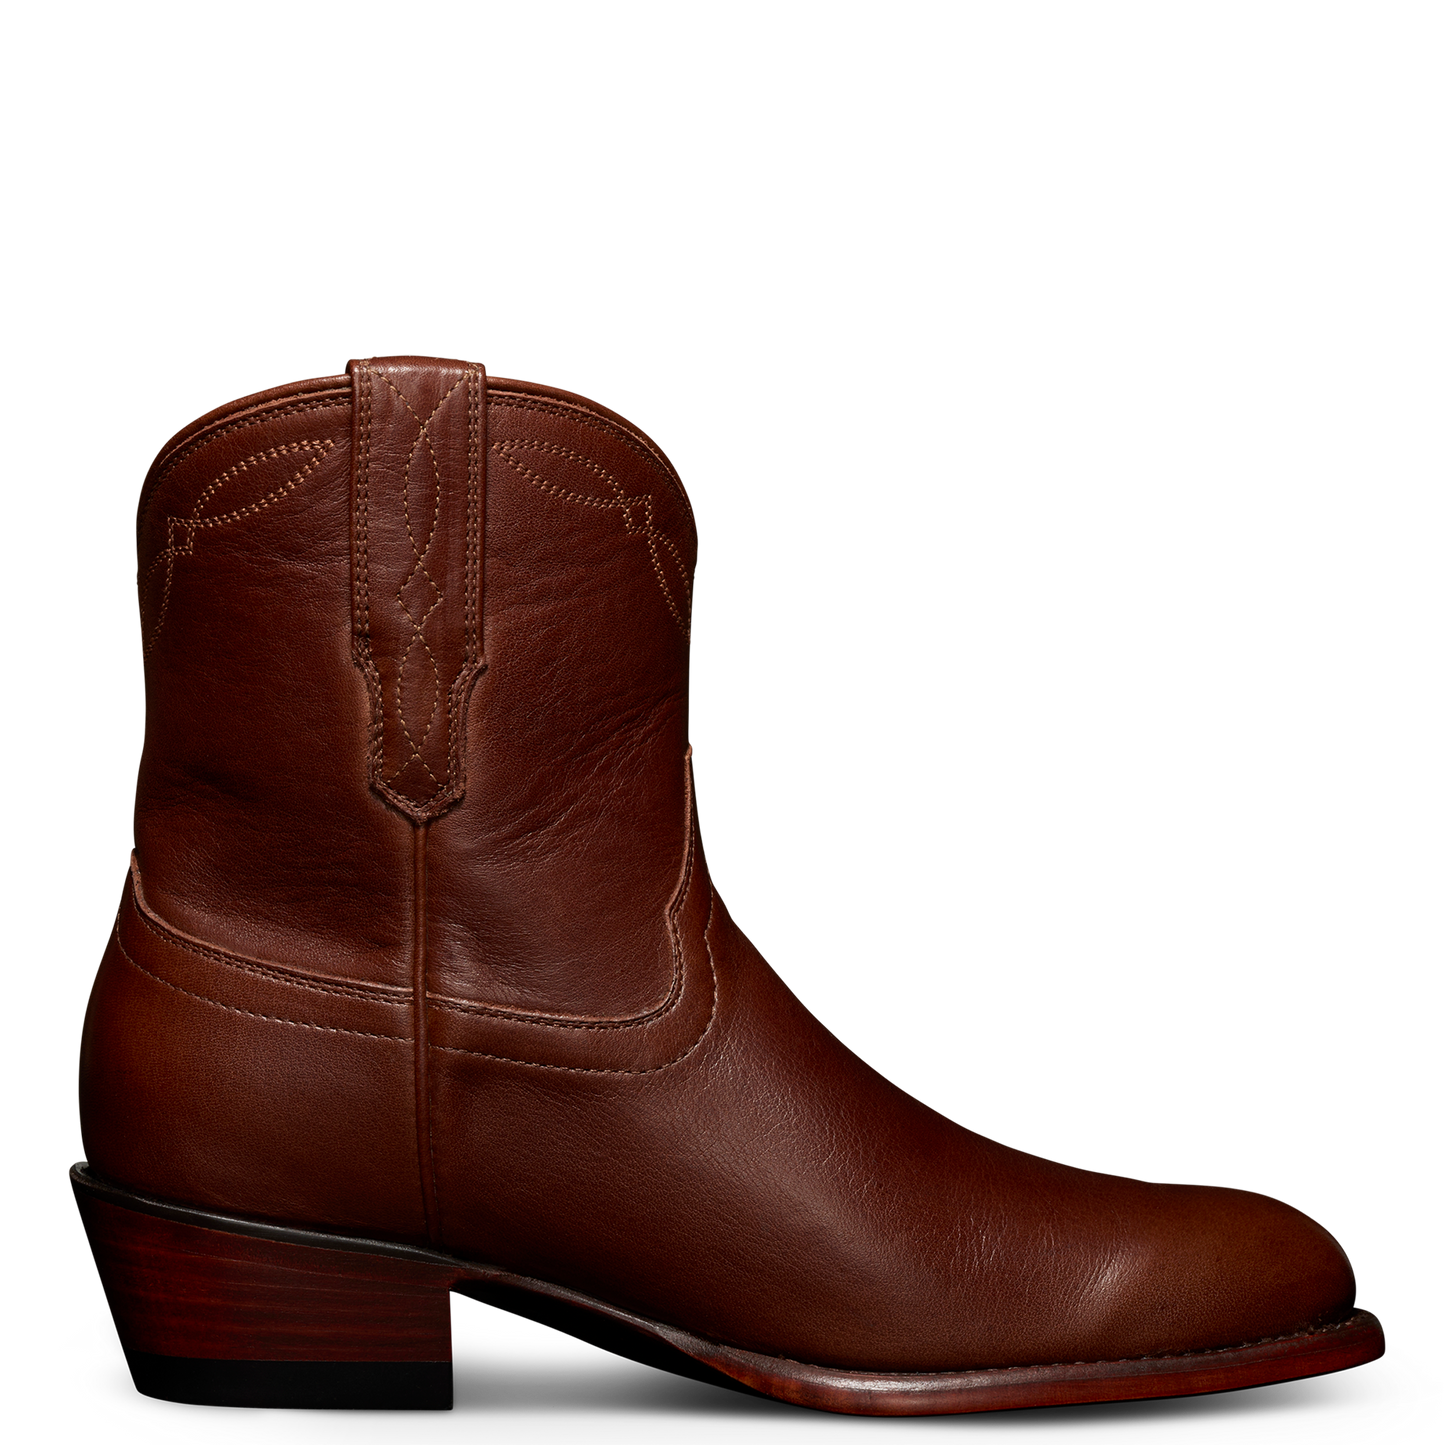 The Paige Boot - Sequoia